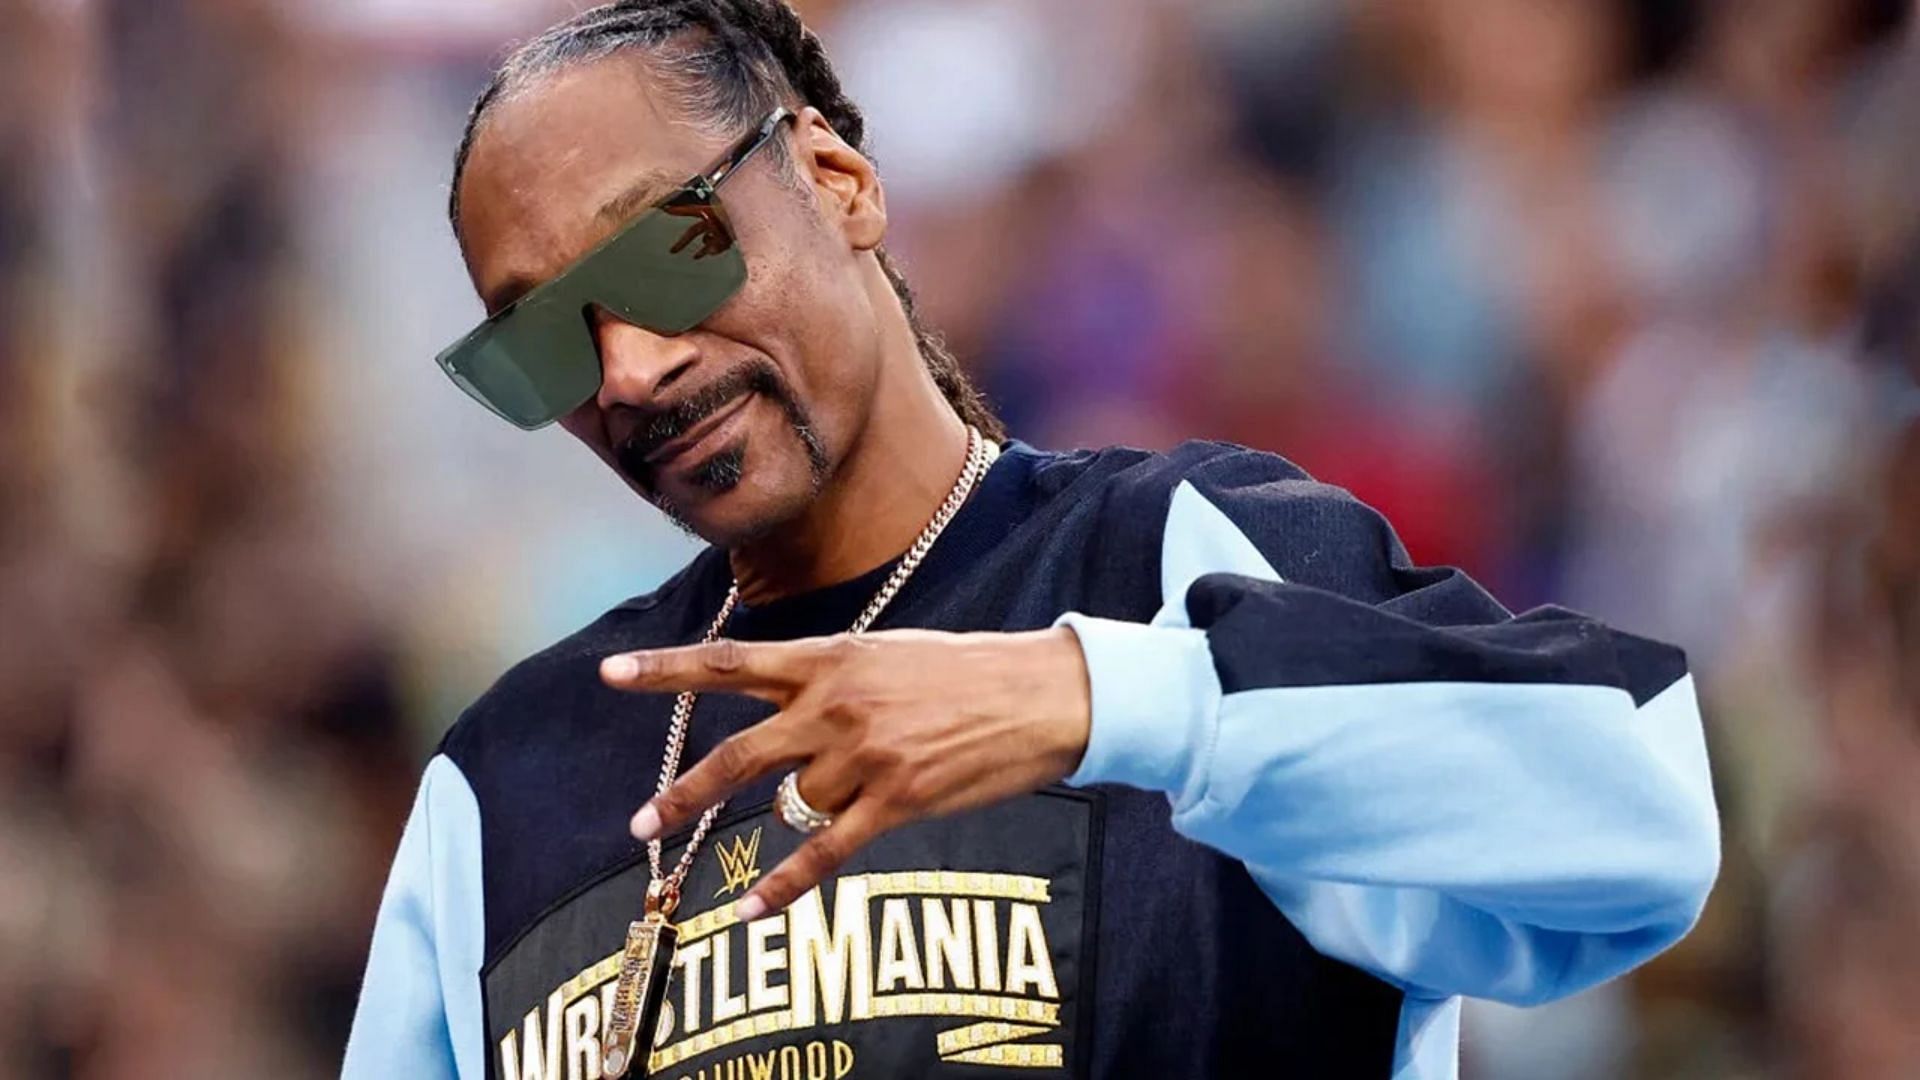 Snoop Dogg surprised the WWE Universe by competing in an impromptu match against The Miz at WrestleMania 39!